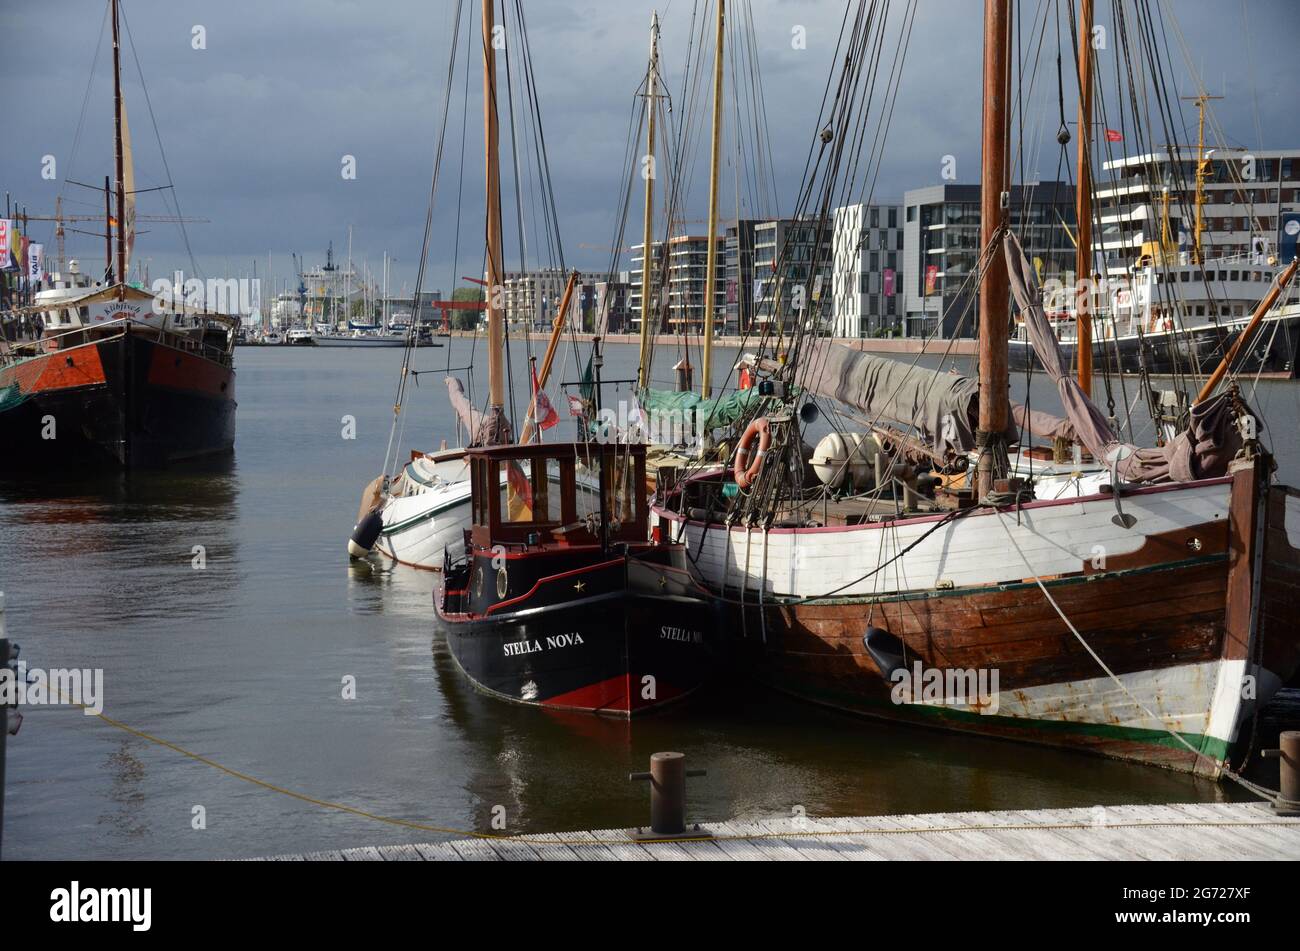 Bremerhaven August 2019: The port with ships in the background Stock Photo